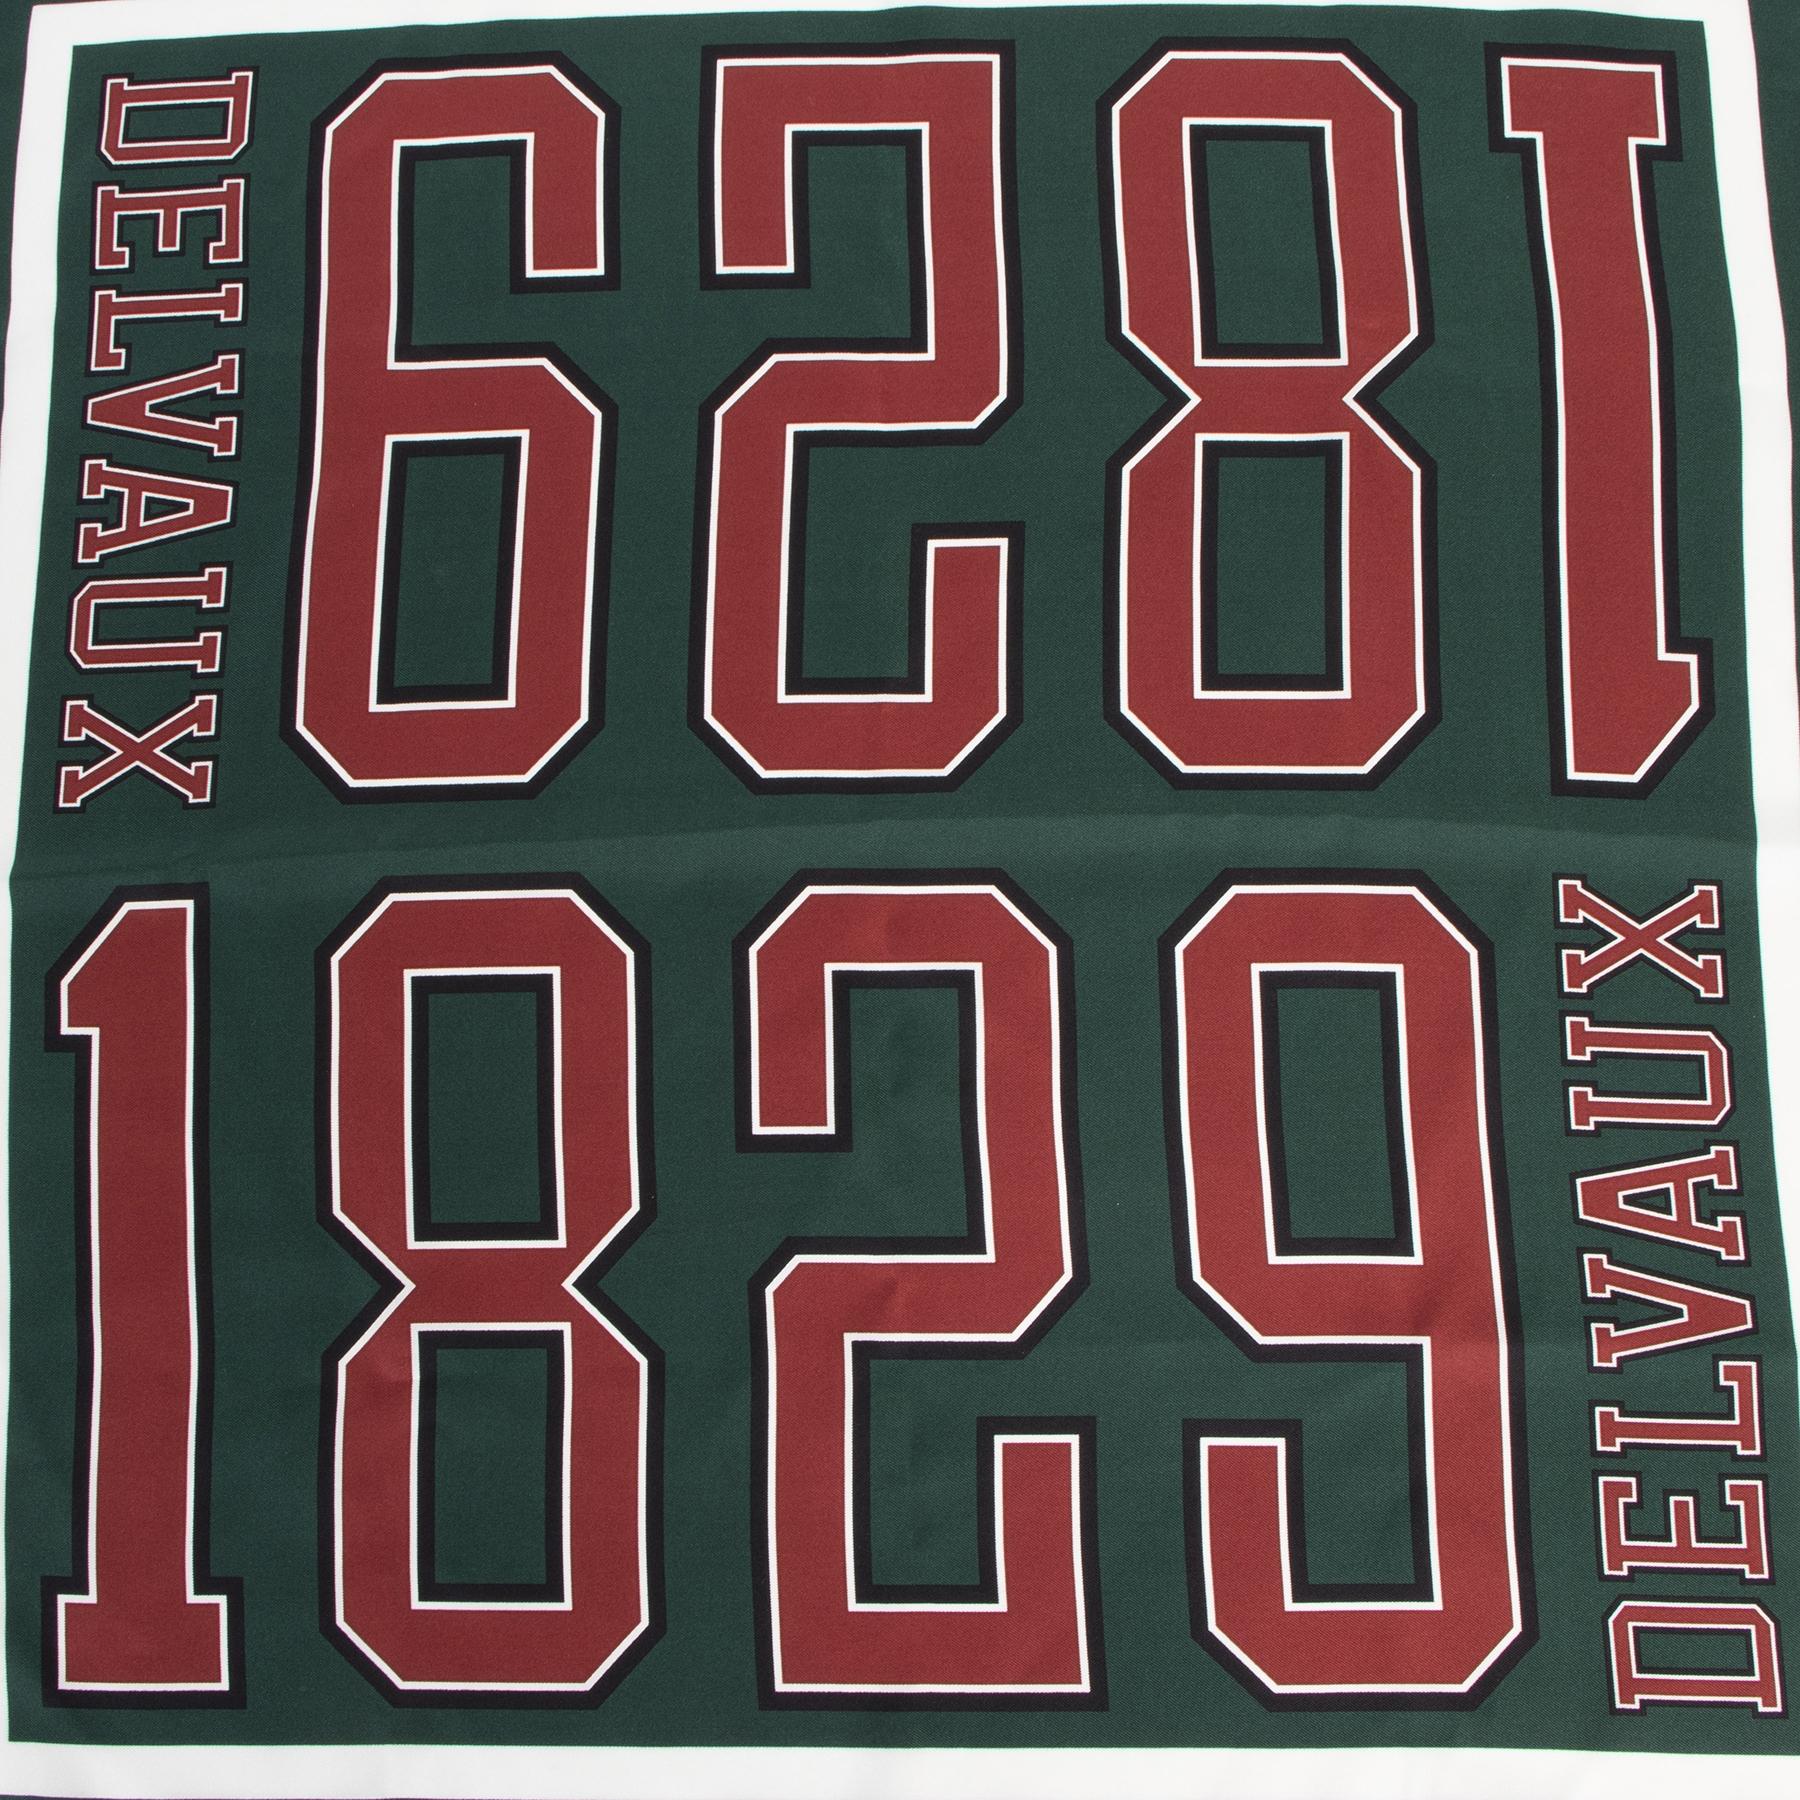 Very good preloved condition

Delvaux Green 1829 Silk Scarf

This gorgeous scarf by Delvaux features the famous 1829 numbers in green, bordeaux and white tones. Wear this beautiful accessory for a touch of sophistication. The scarf is crafted out of